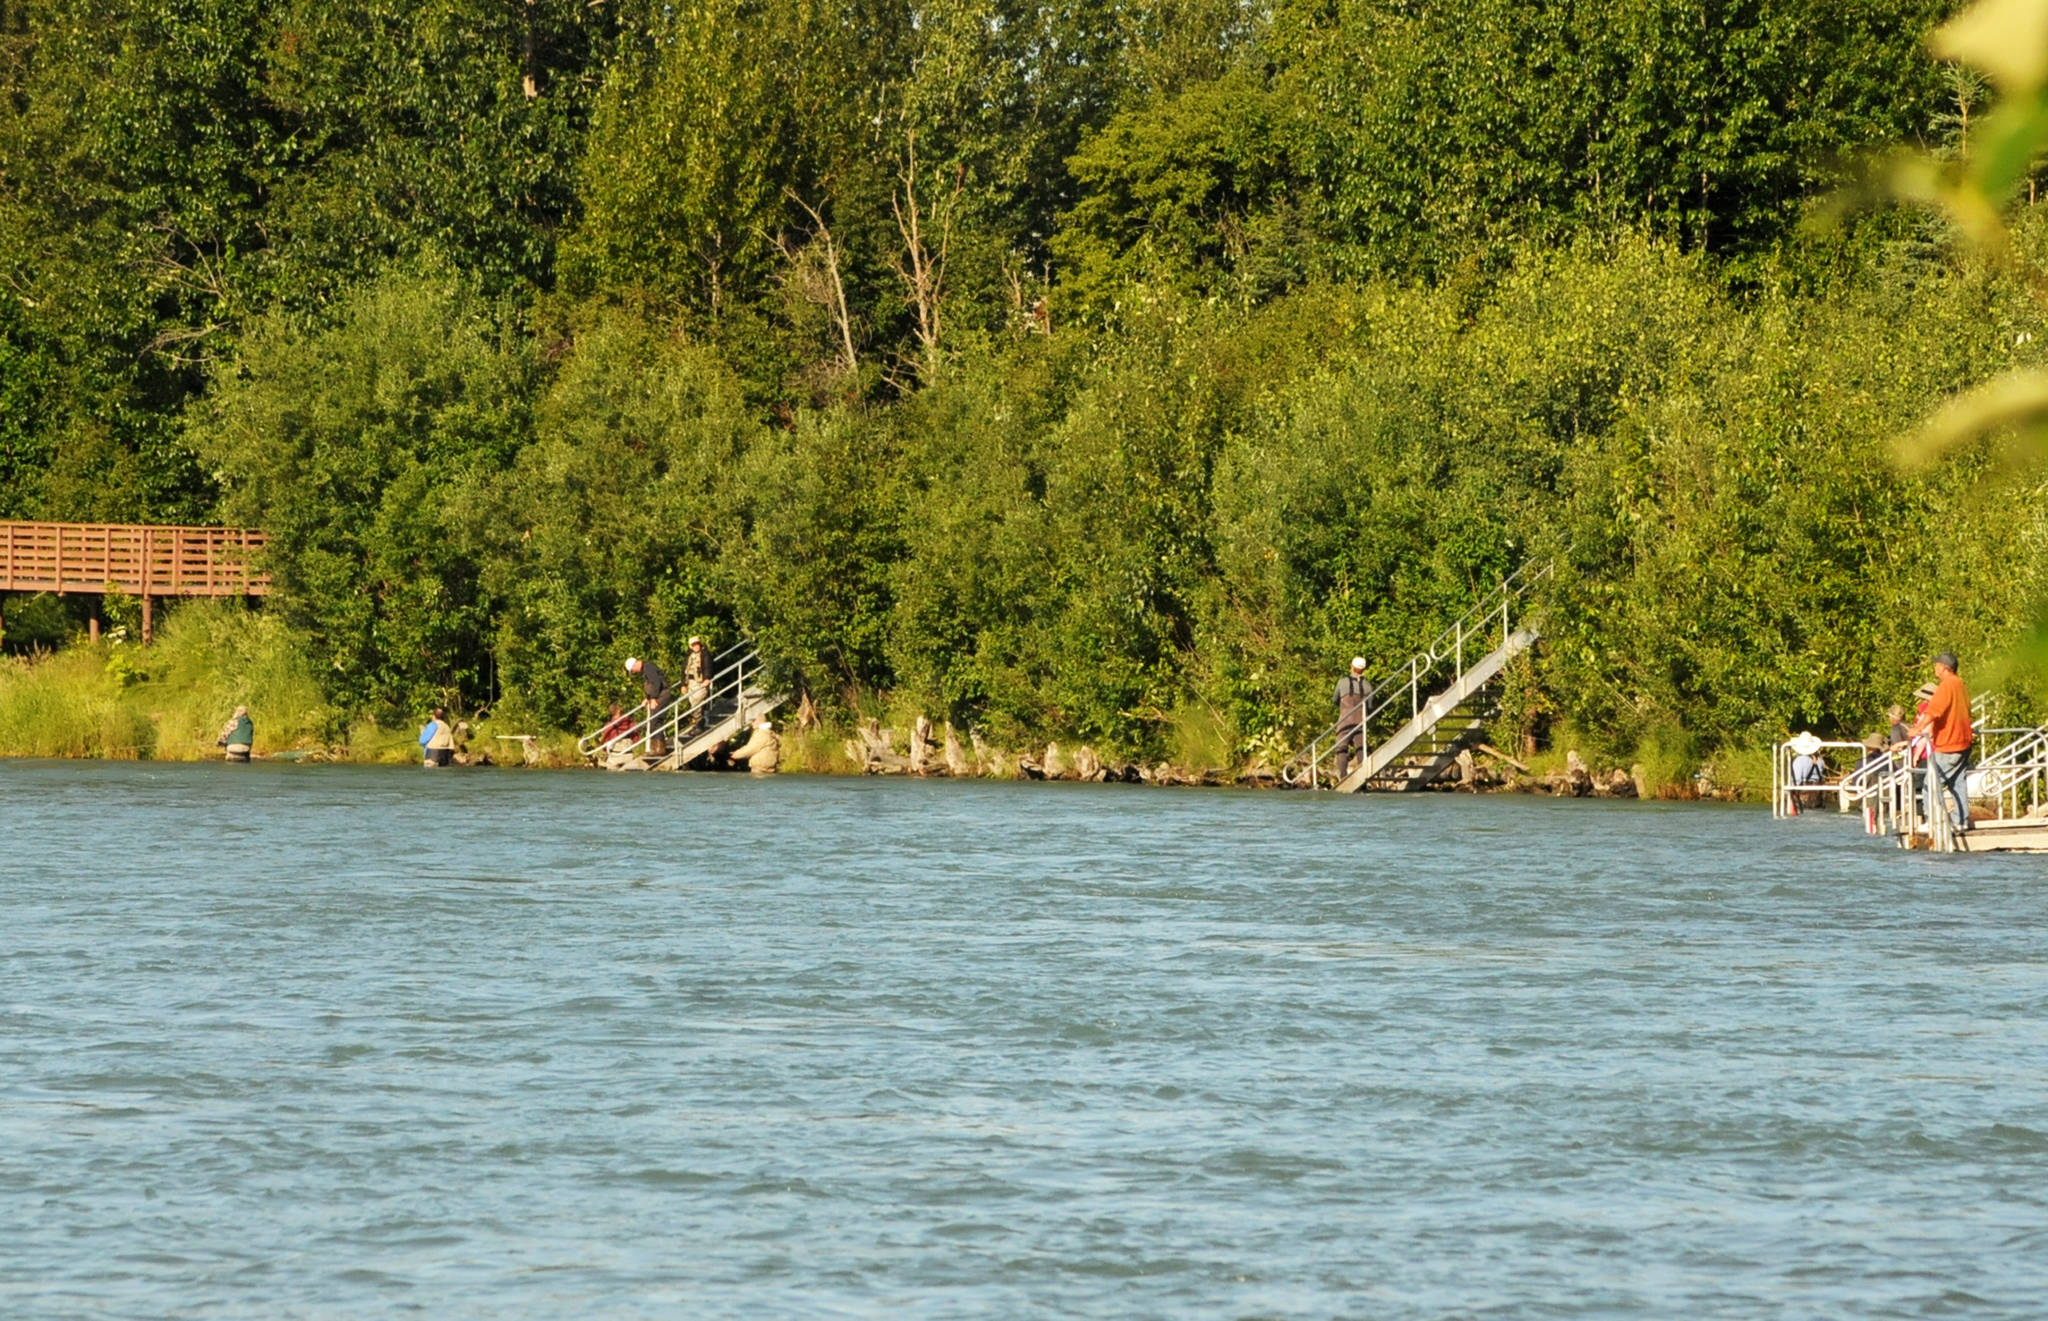 Anglers cast their lines into the Kenai River near Soldotna Creek Park on Wednesday, July 18, 2018 in Soldotna, Alaska. The water in the Kenai River is a little higher than usual — about 9.71 feet, according to U.S. Geological Survey’s gauge at Soldotna — but has fallen since last week and is significantly below the flood stage of 12 feet. Anglers were hitting the banks on Wednesday morning for sockeye salmon, which normally peak in returning numbers to the Kenai River in mid-July. (Photo by Elizabeth Earl/Peninsula Clarion)